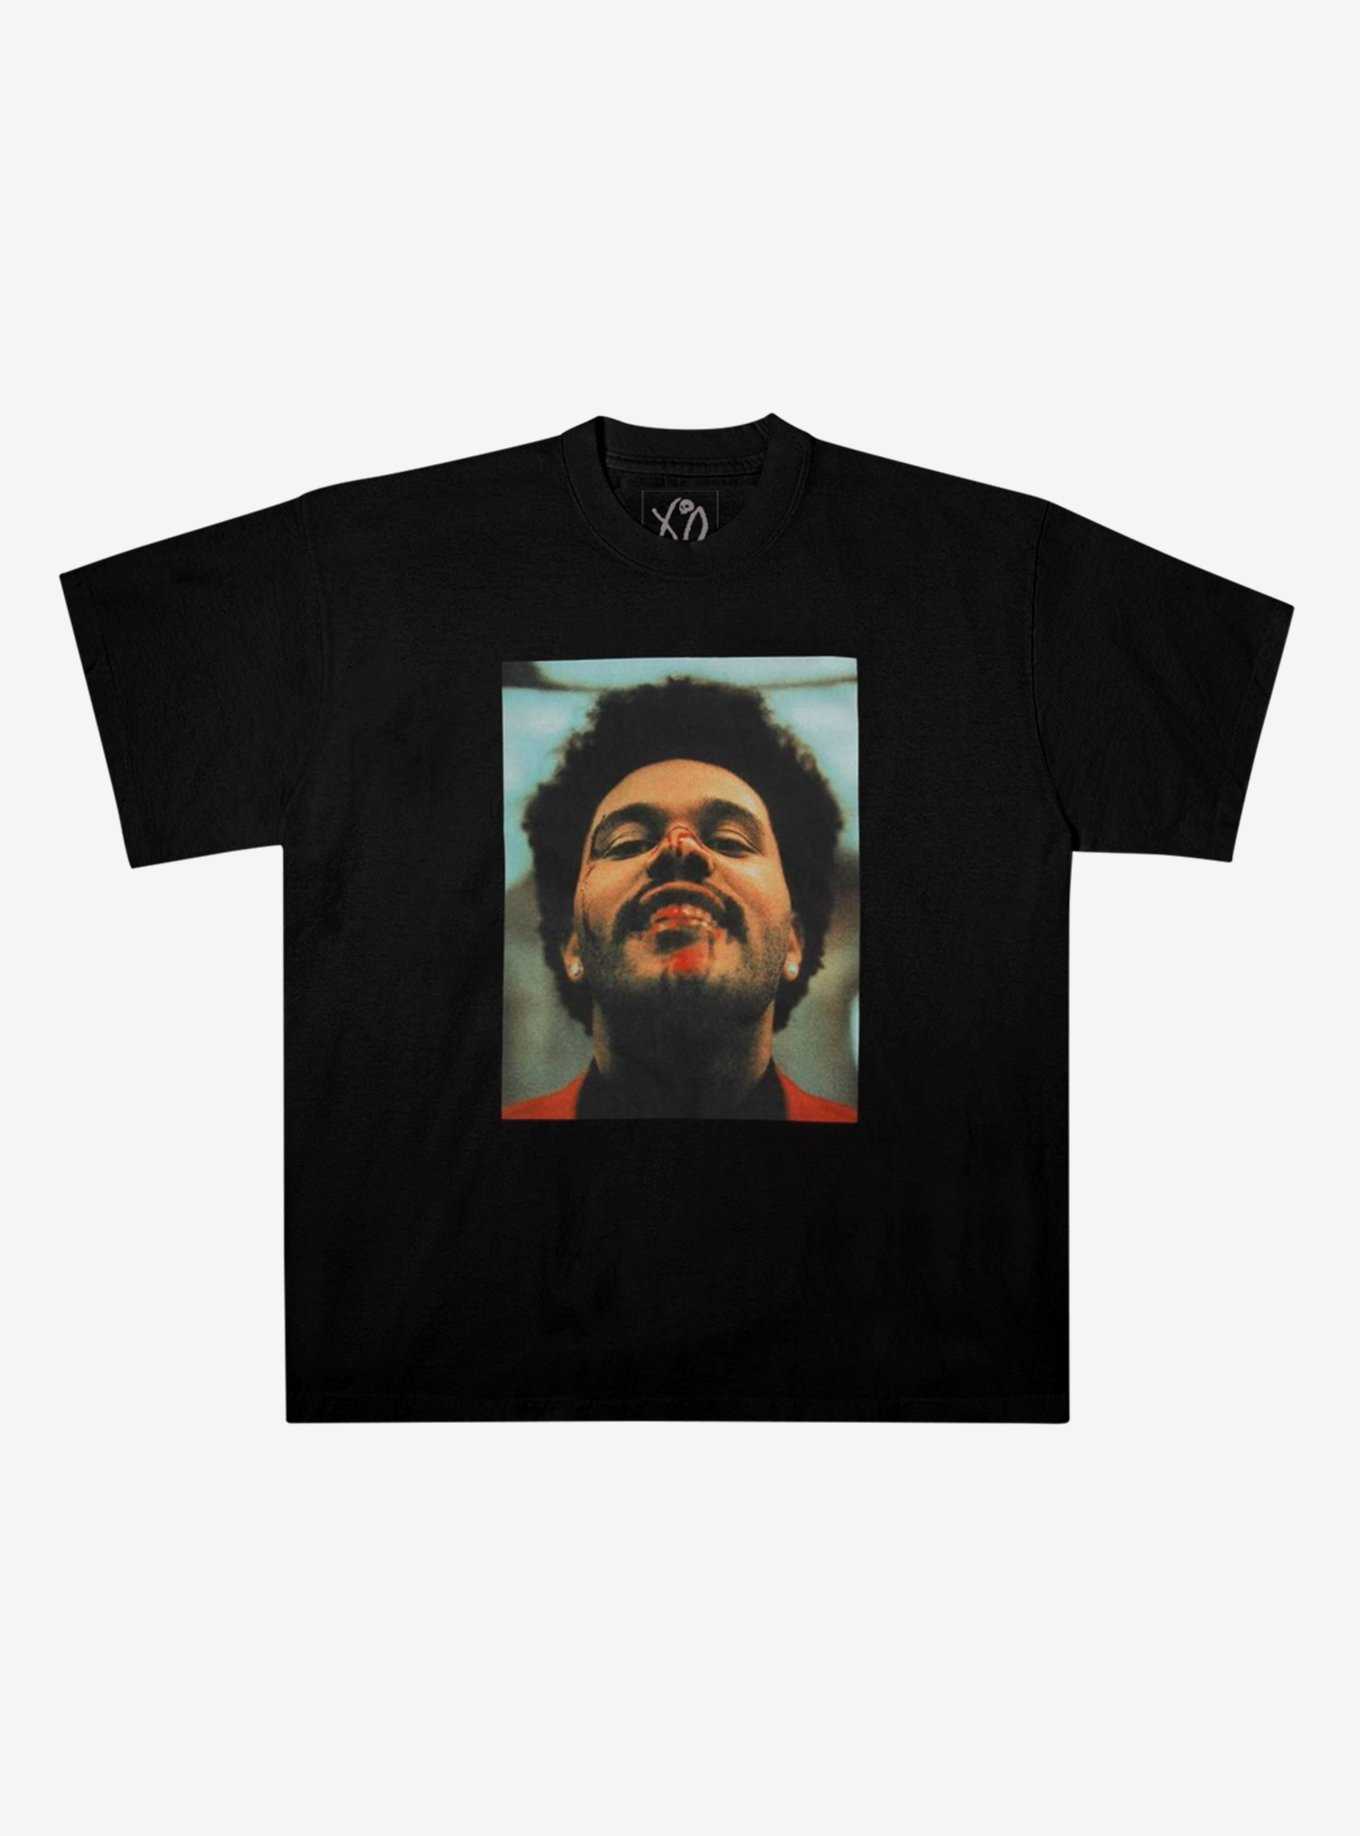 The Weeknd After Hours Album Cover T-Shirt, , hi-res